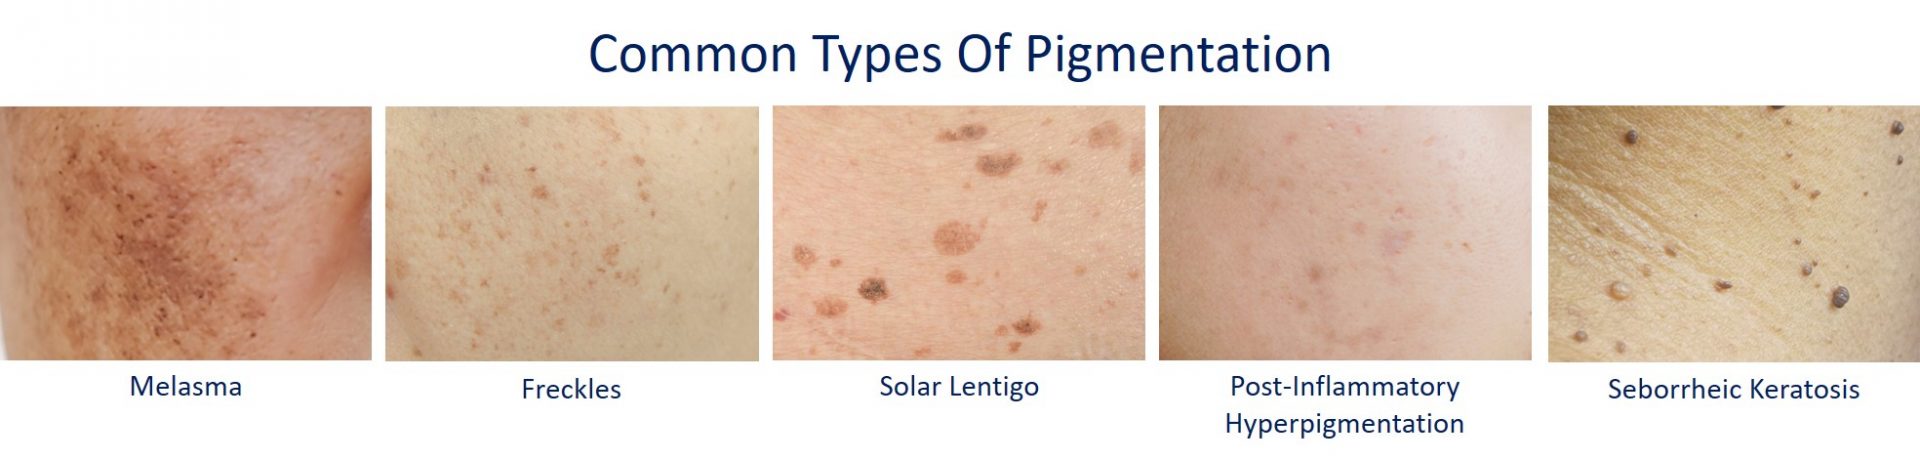 common types of pigmentation in asian skin